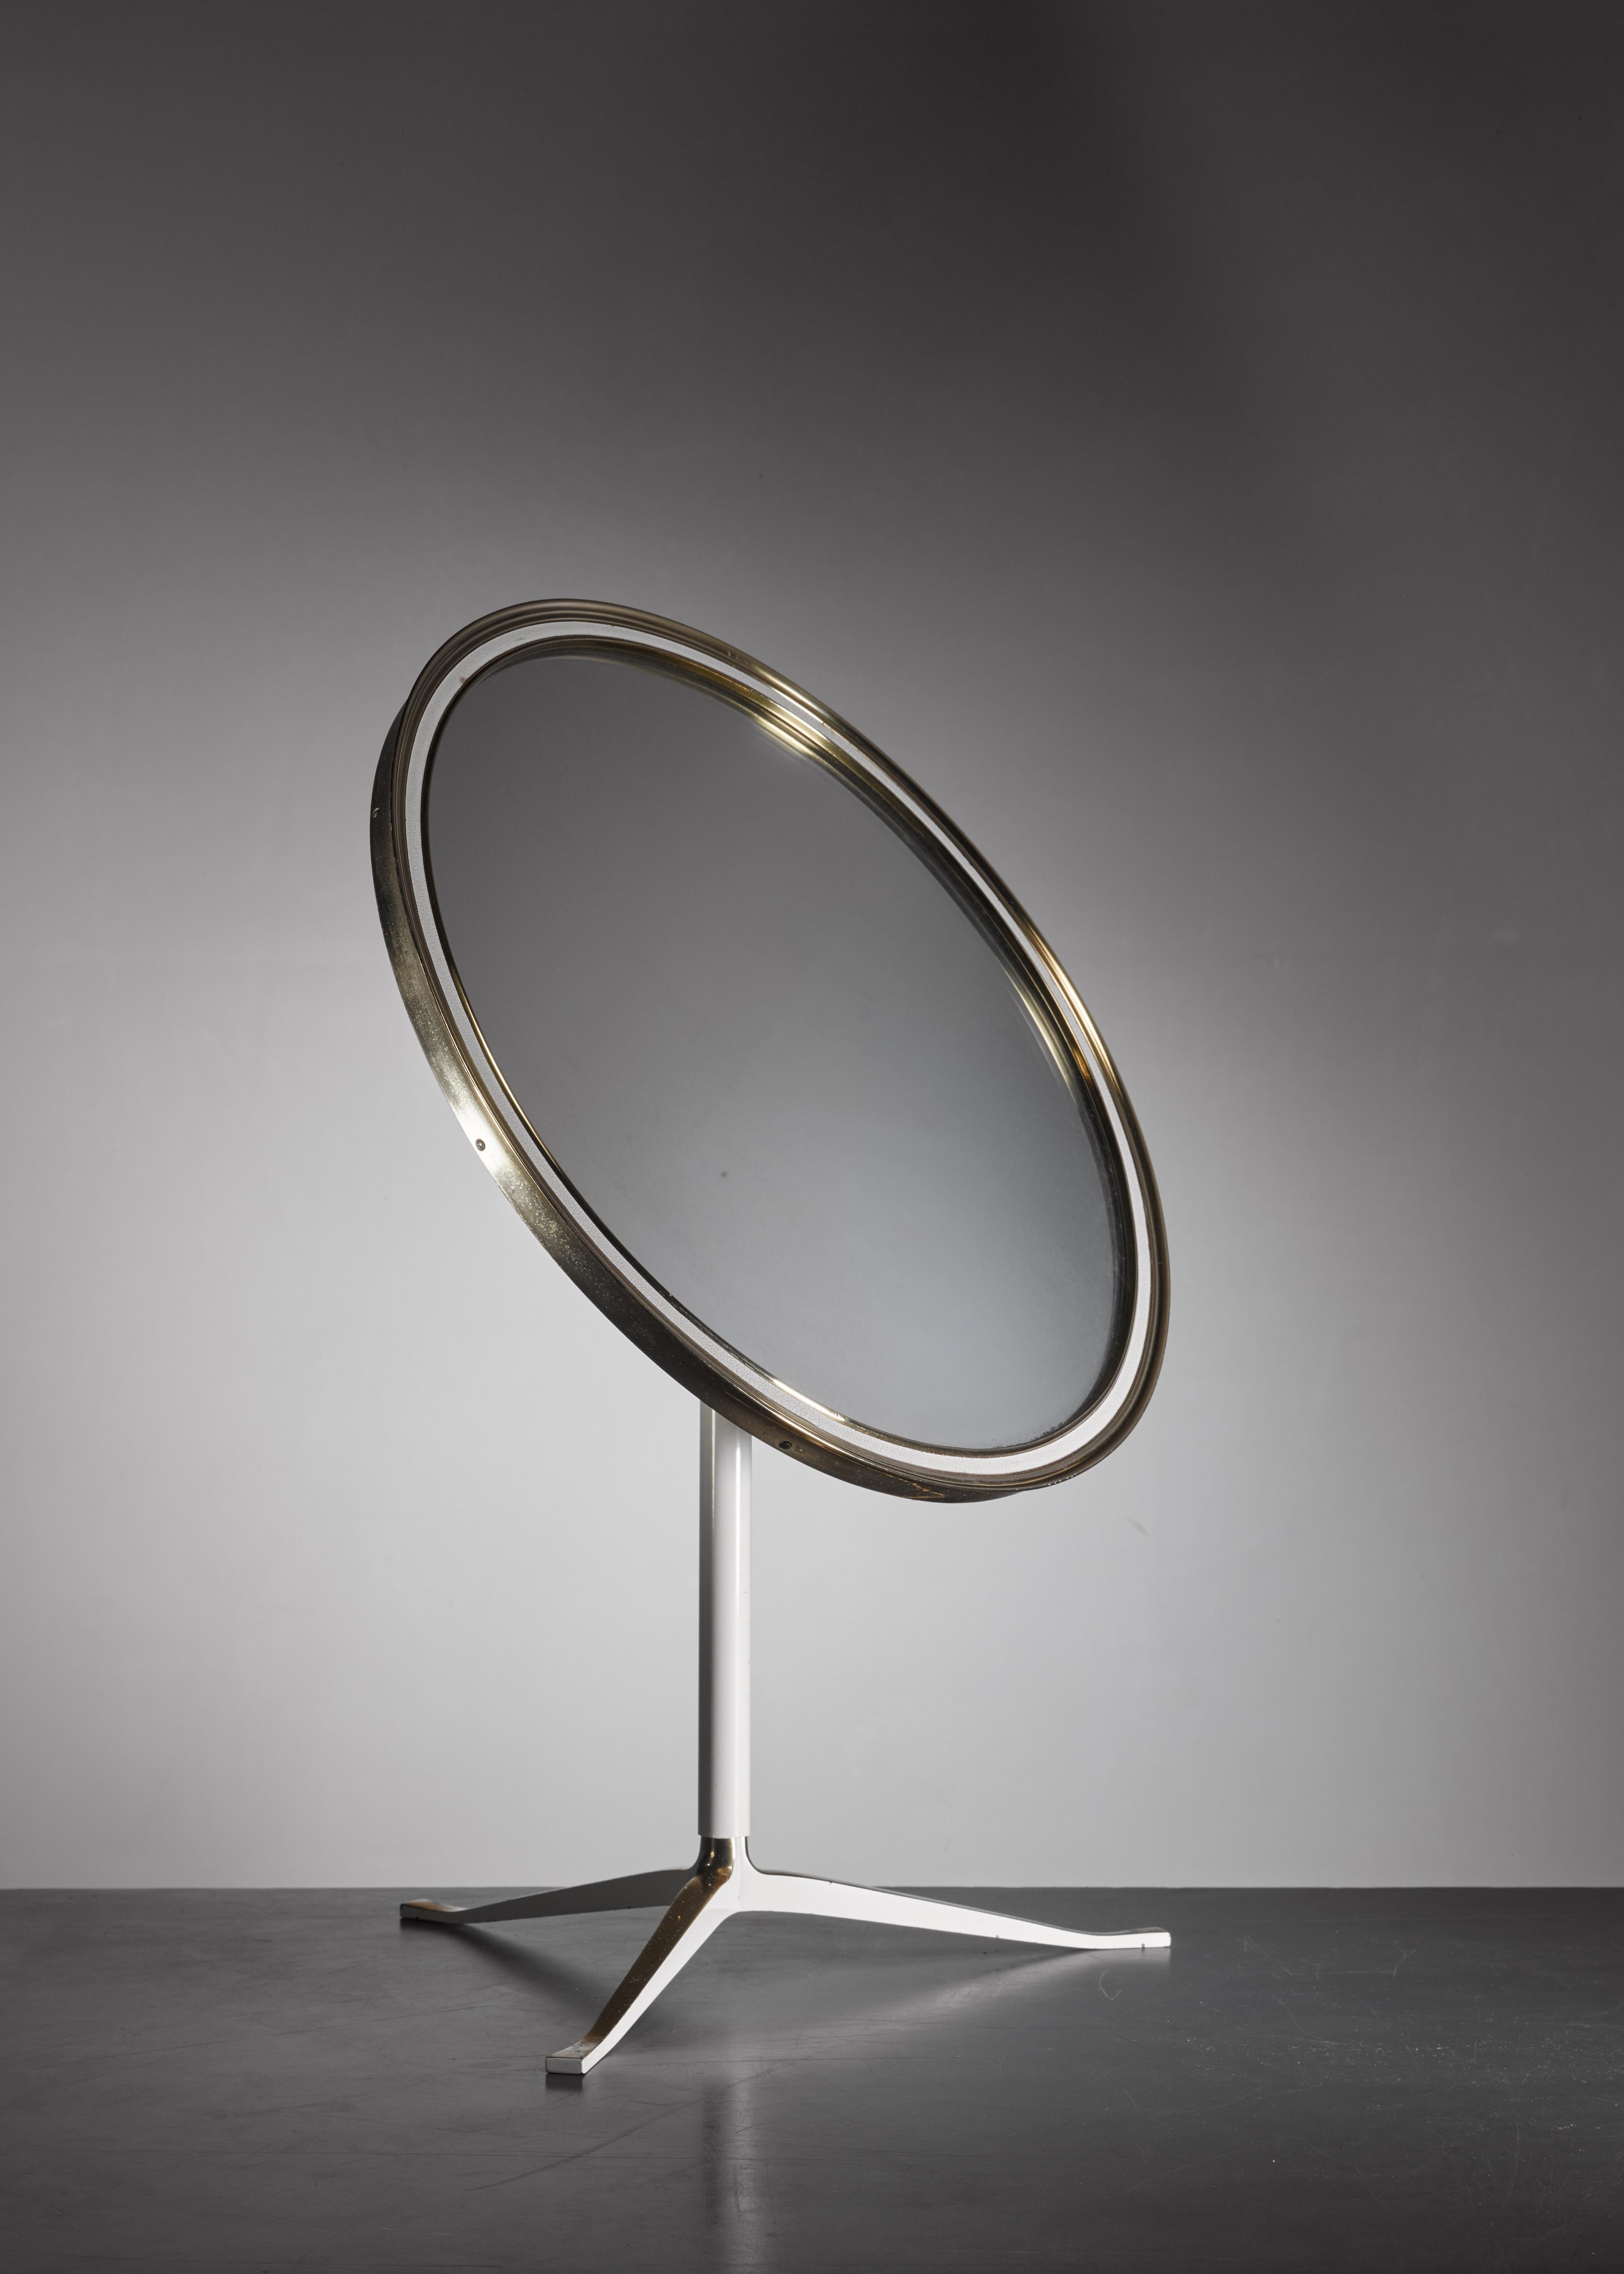 An elegant 1950s brass table mirror on a tripod foot. The stem and parts of the foot are lacquered white and the frame has a white strip inside. The back of the mirror has the original fabric cover. In a great vintage condition.